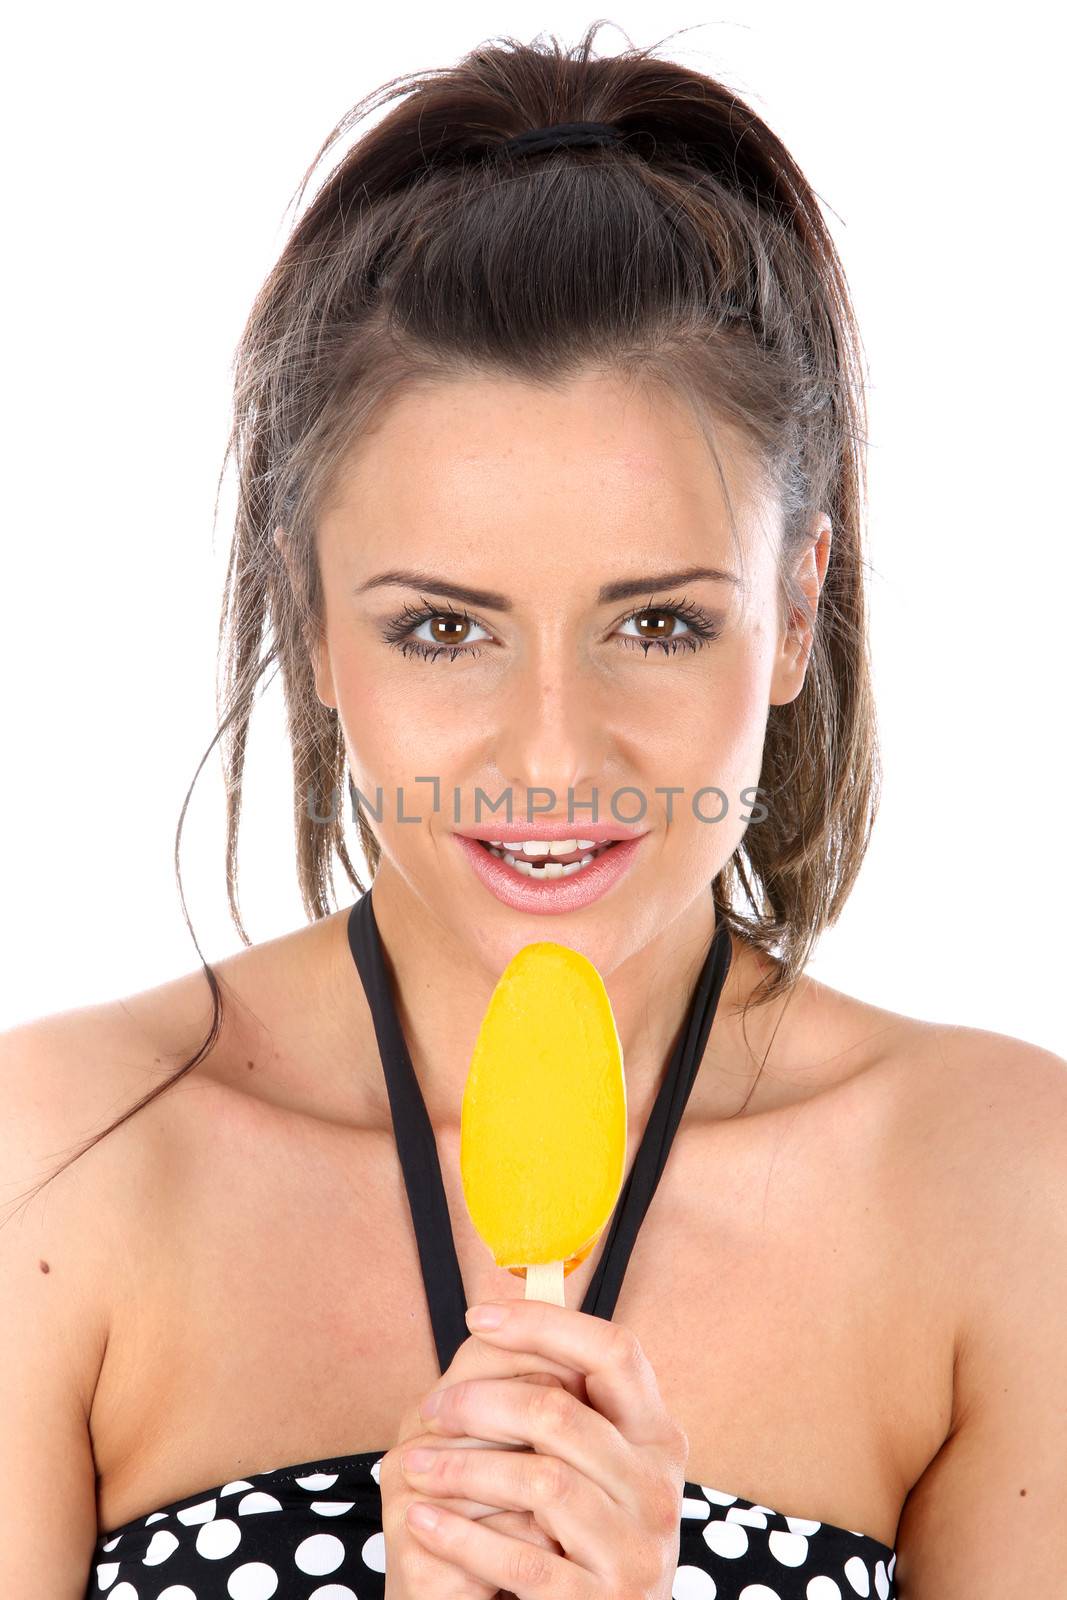 Model Released. Woman Eating Ice lolly